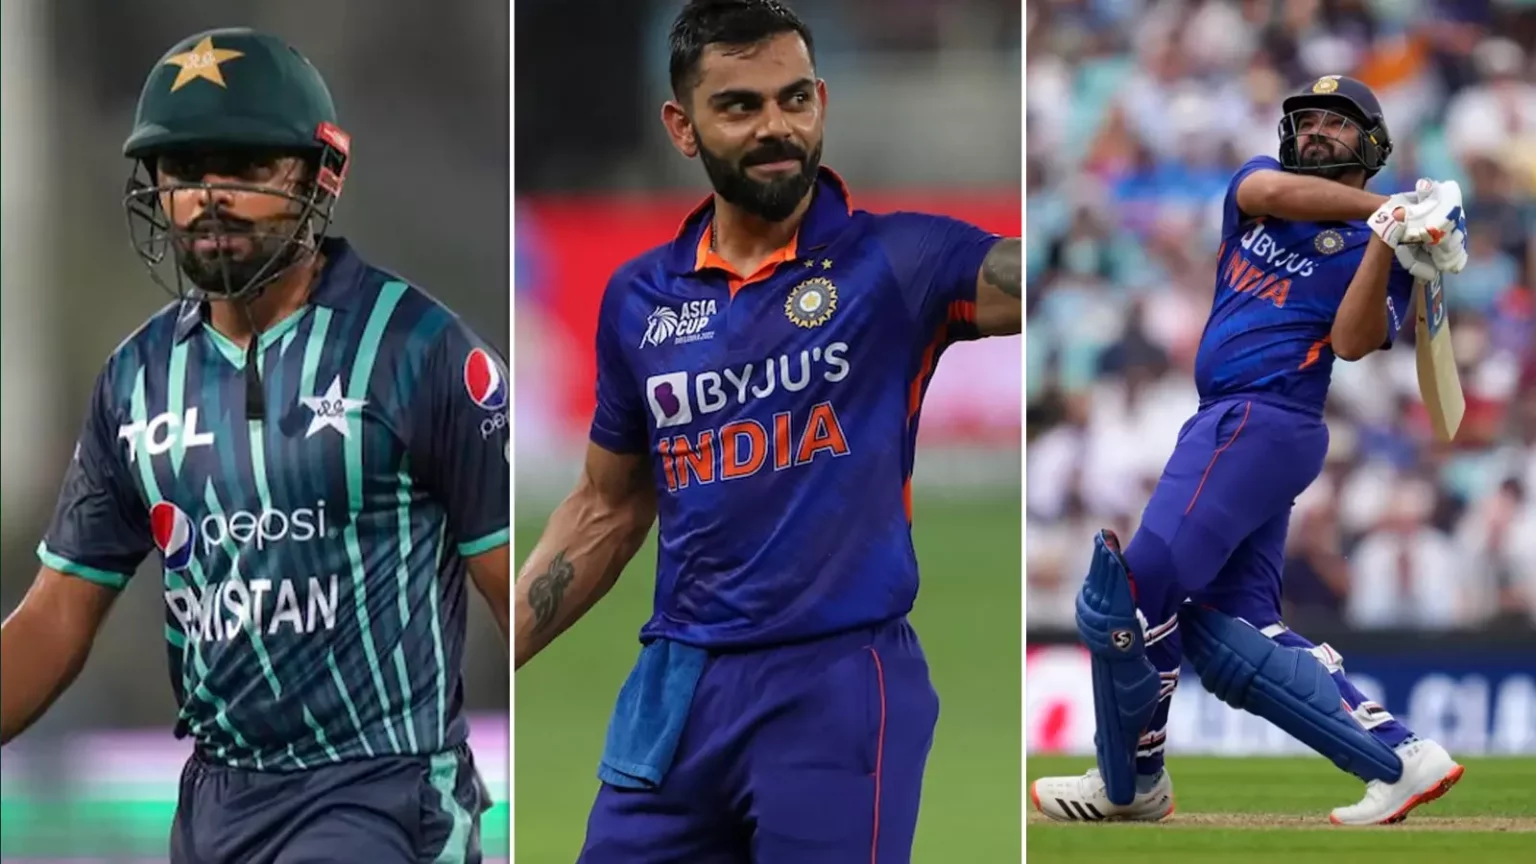 babar-azam-rohit-sharma-and-virat-kohli-to-shatter-records-in-pakistan-india-clash-in-asia-cup-2023